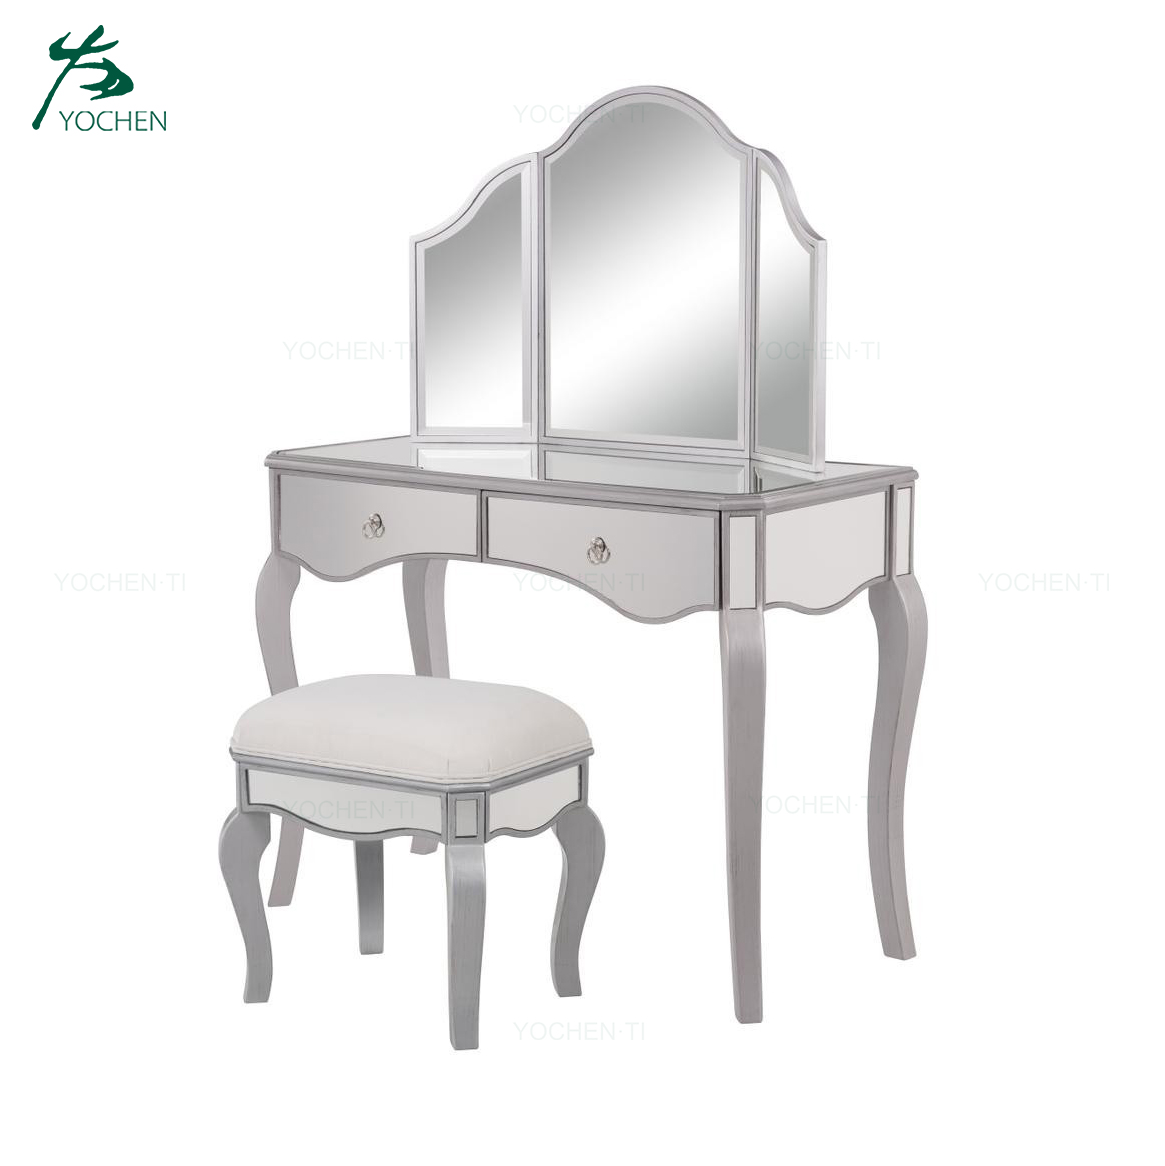 European Style Mirrored Furniture Mirrored Console Table